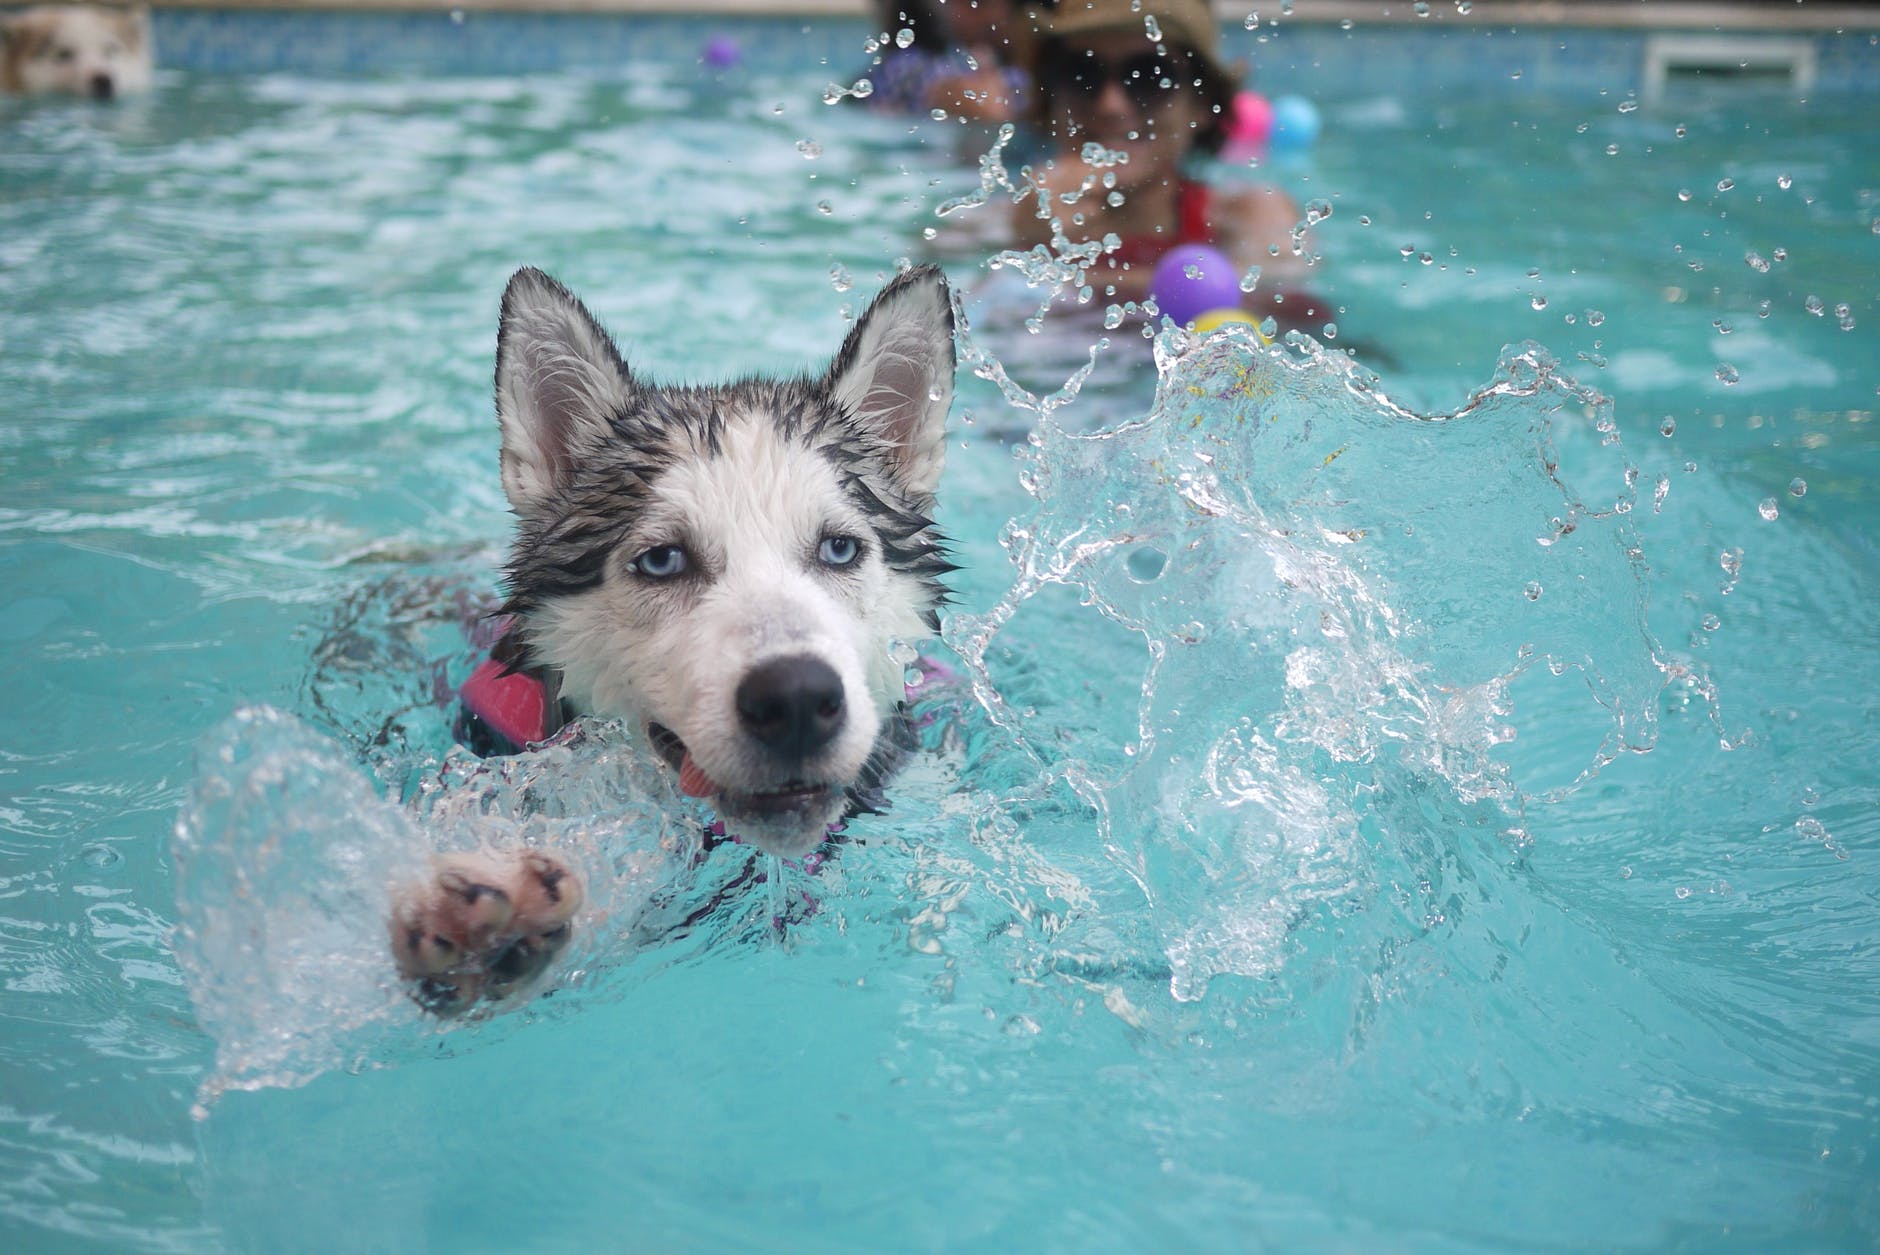 Siberian husky splashes playfully in a pool as it swims toward the camera